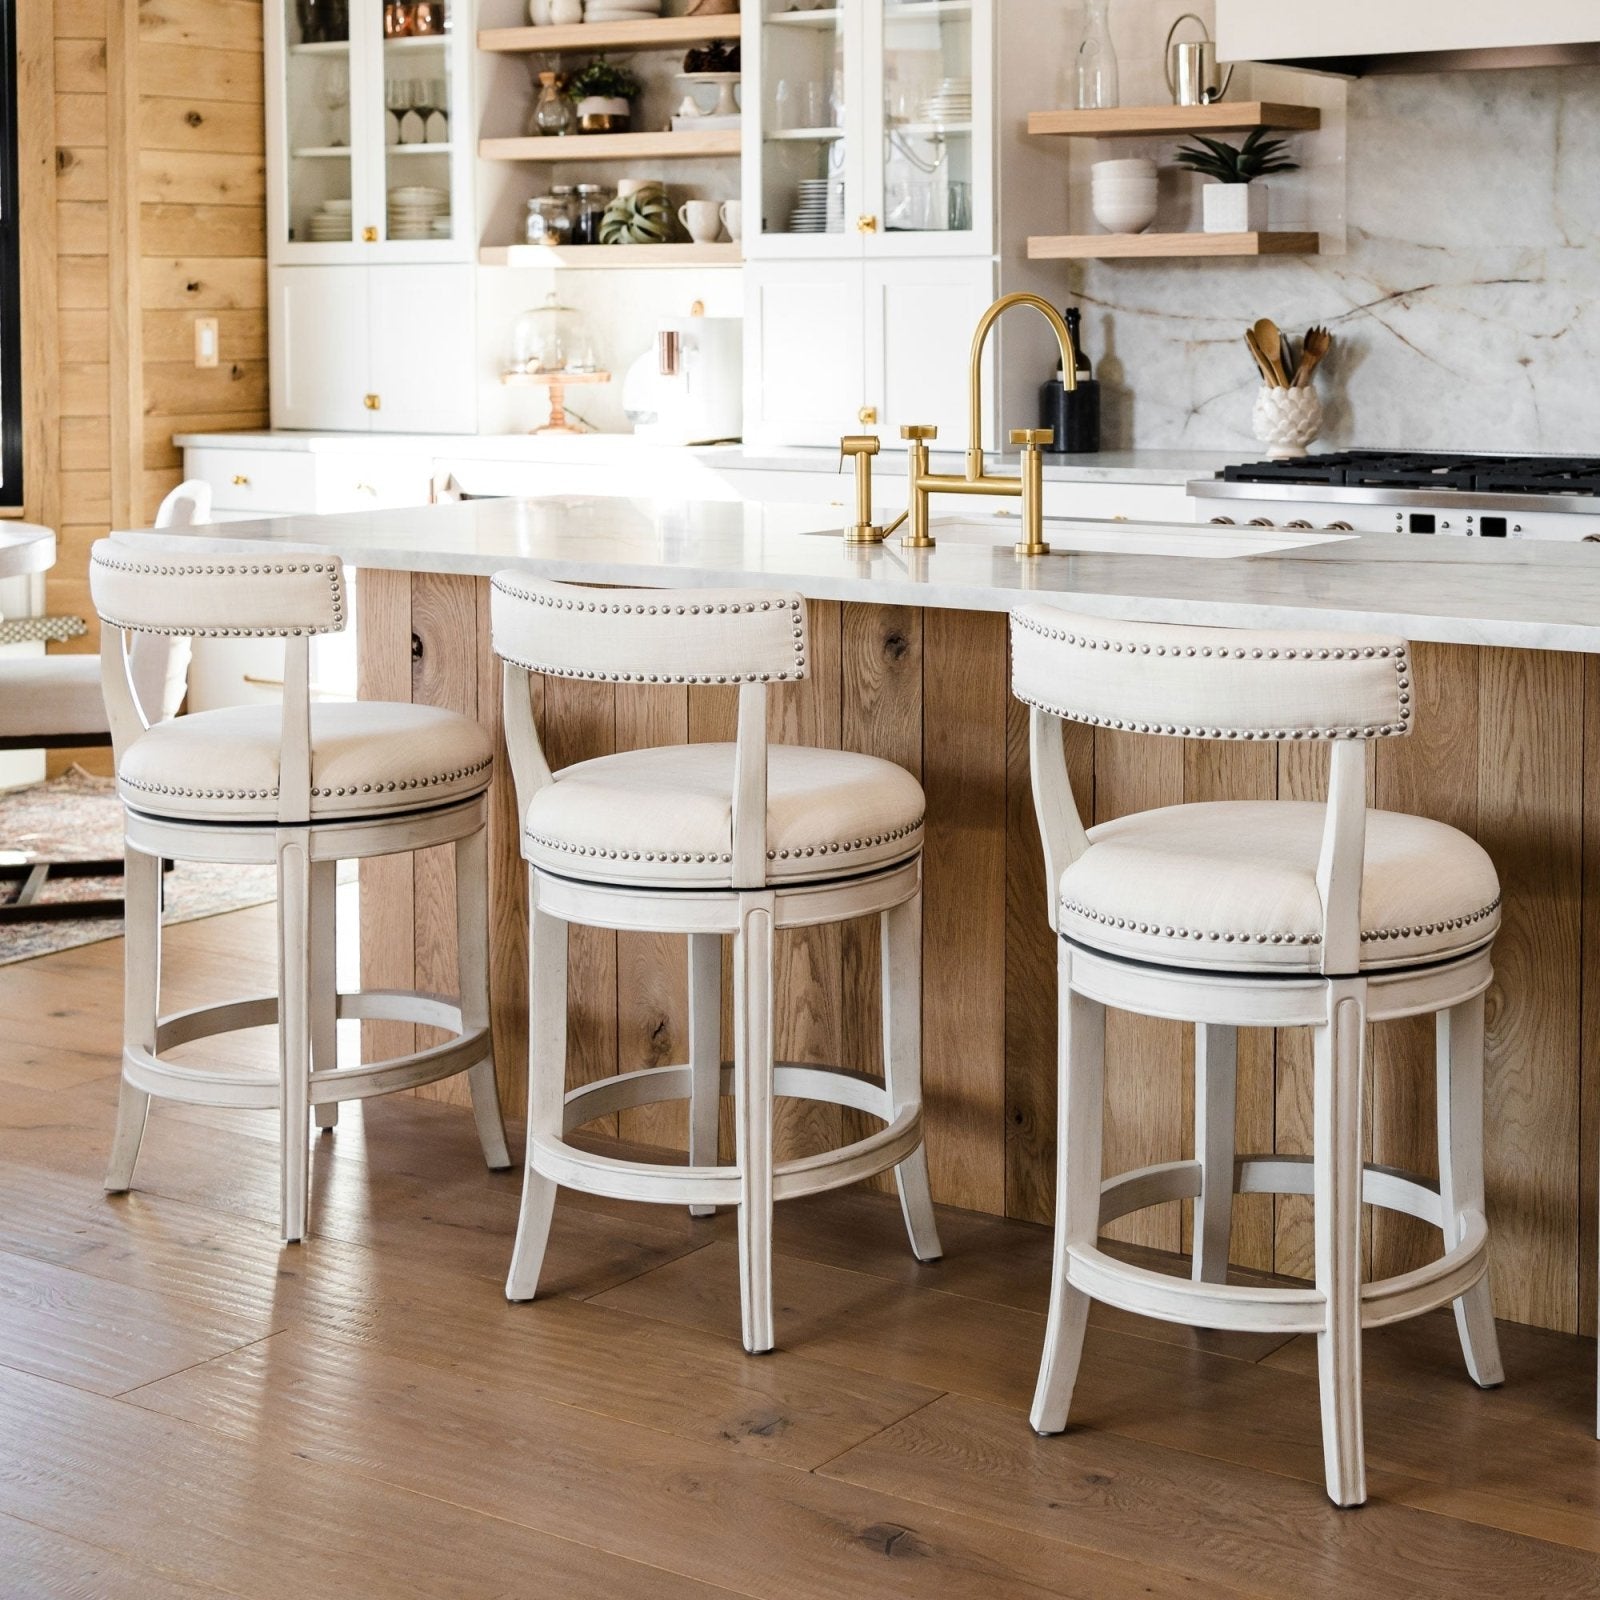 Alexander Bar Stool in White Oak Finish with Natural Color Fabric Upholstery in Stools by Maven Lane